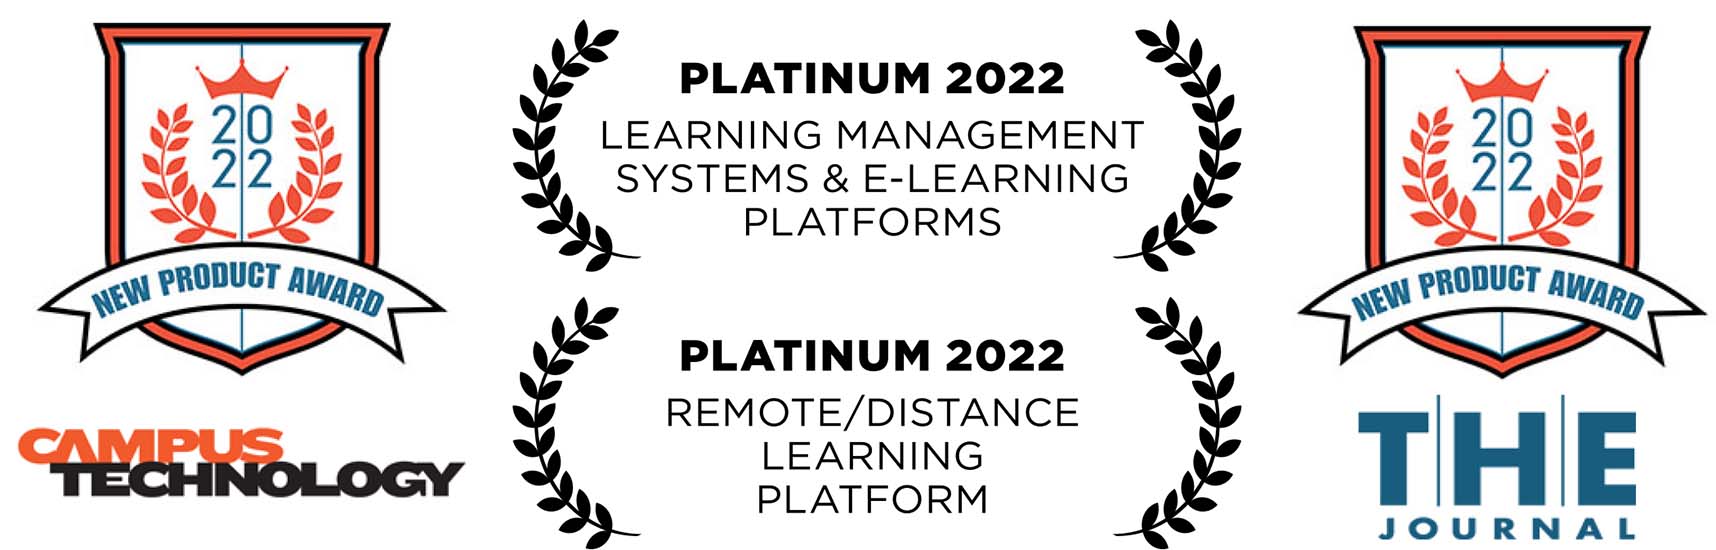 2022 Campus Technology and THE Journal New Product Awards for Learning Management and Remote Learning Platforms